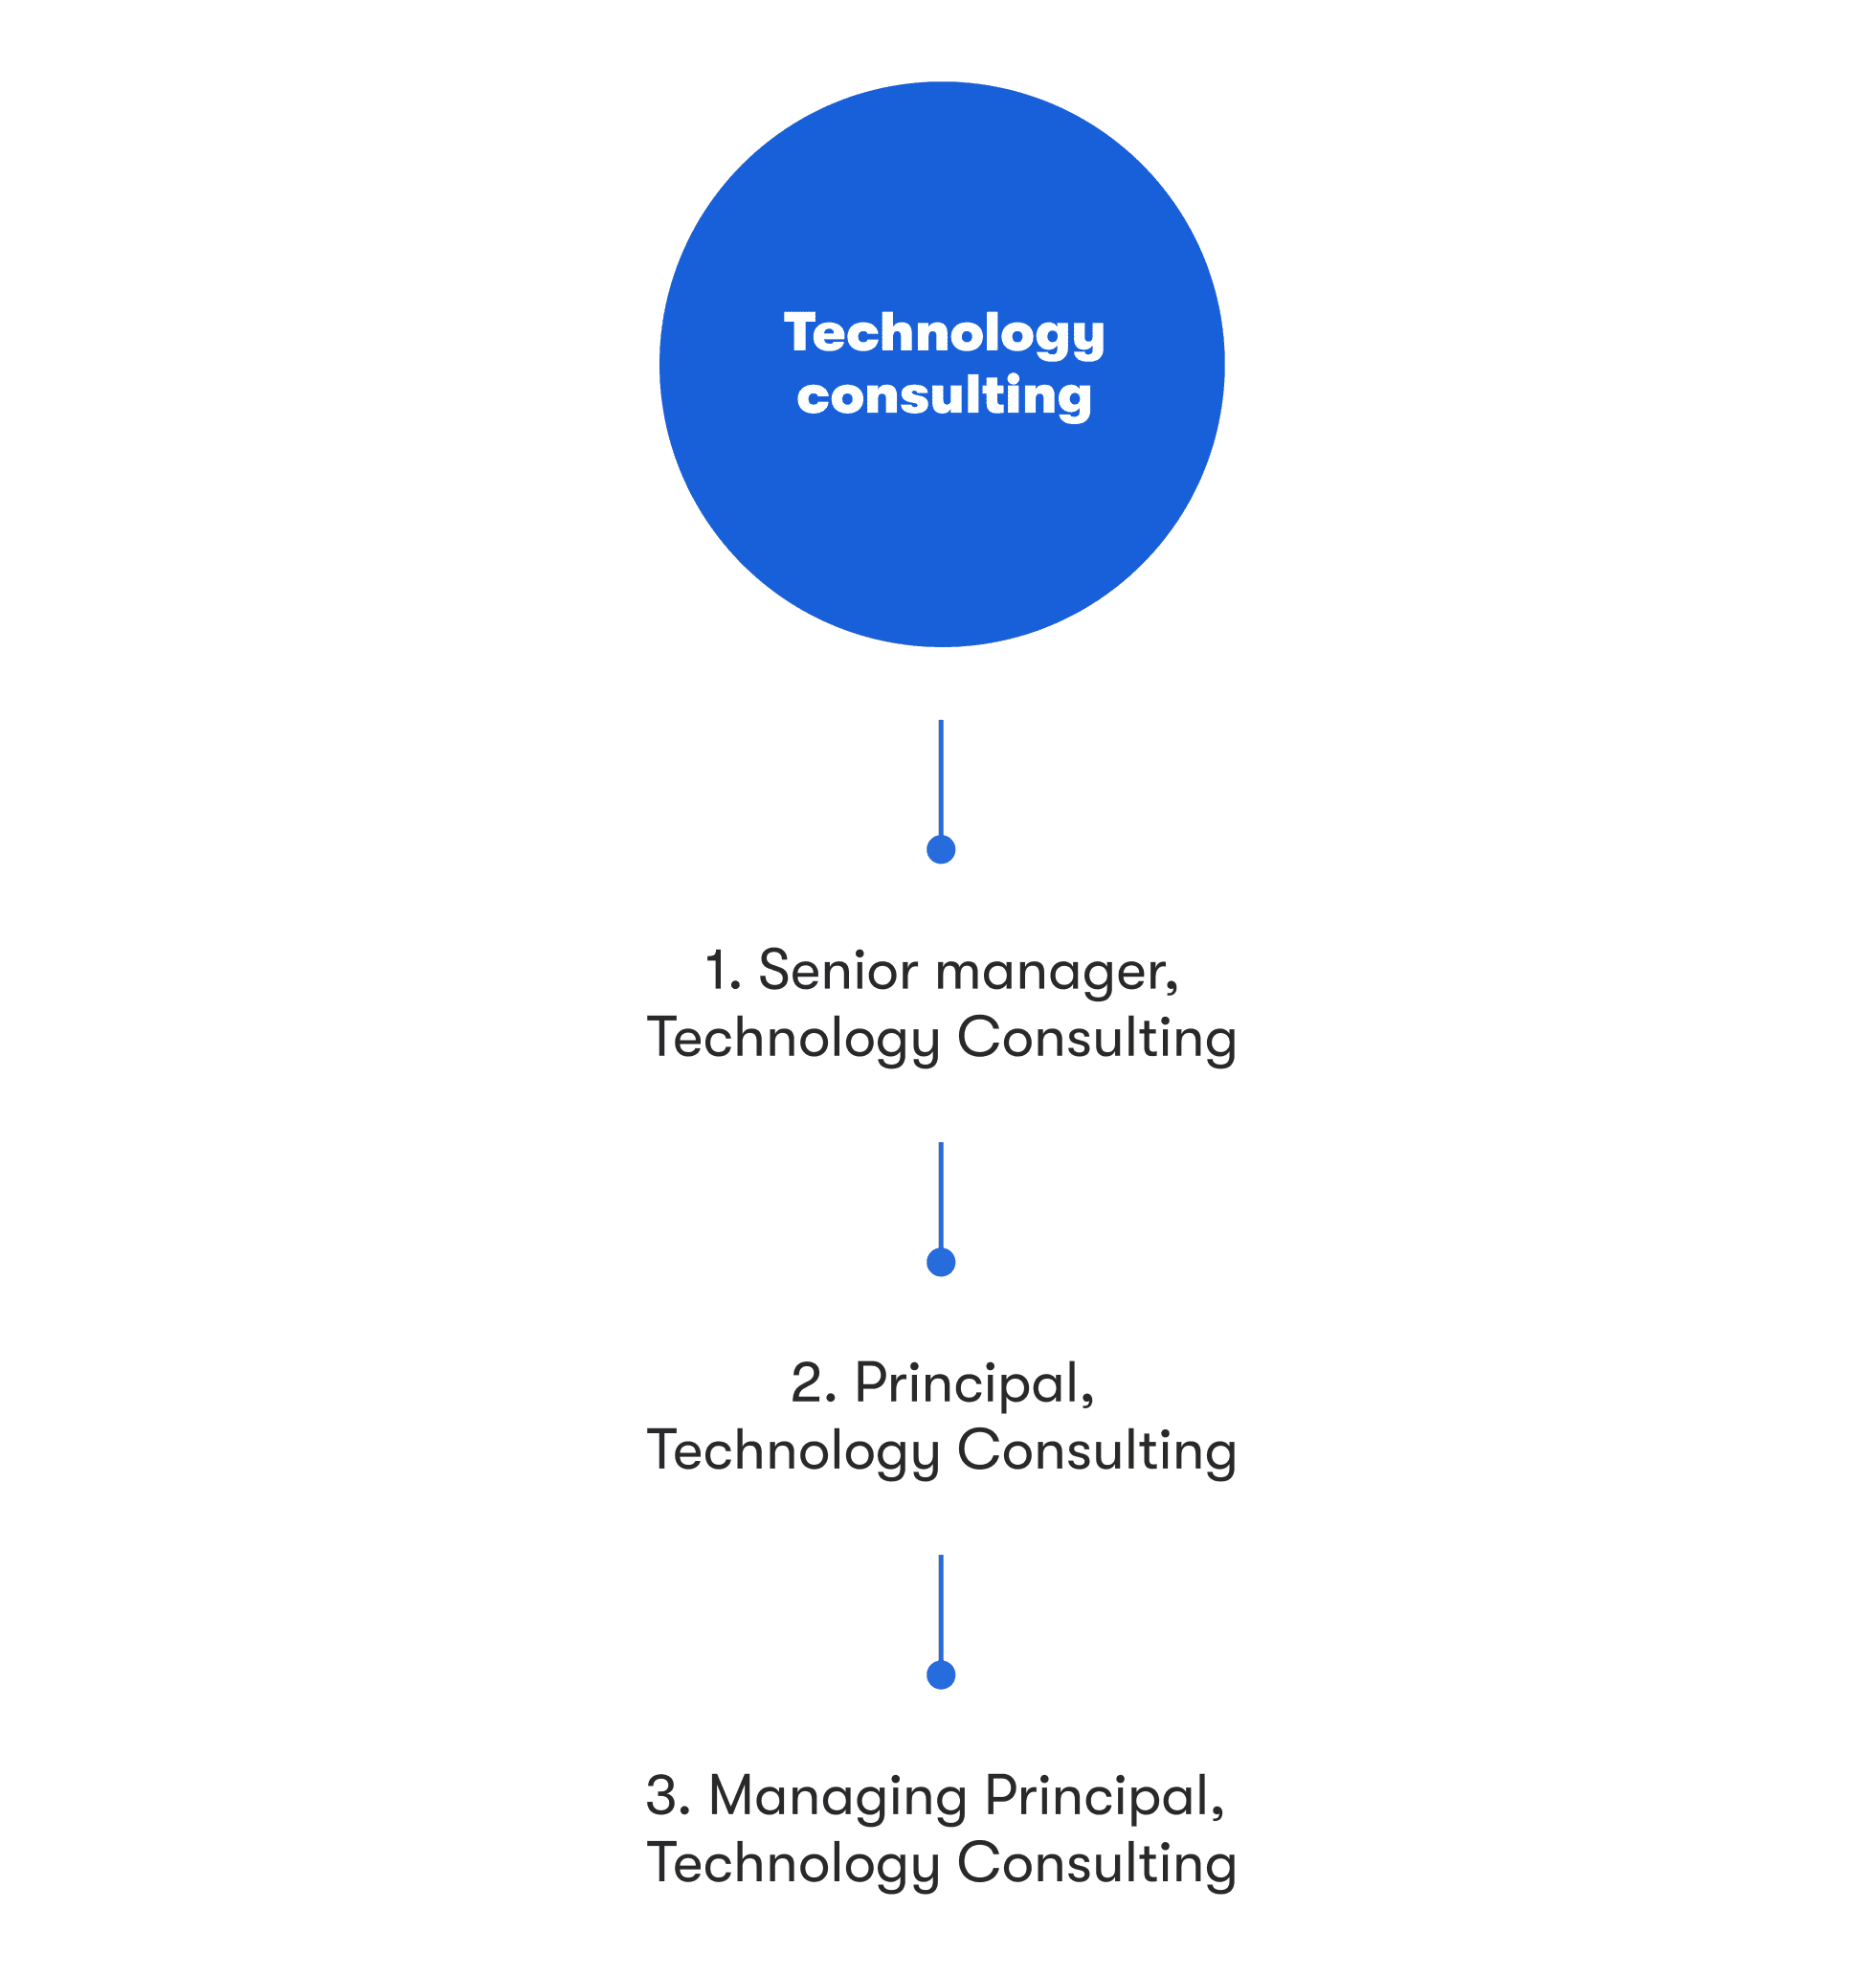 Technology consulting career path